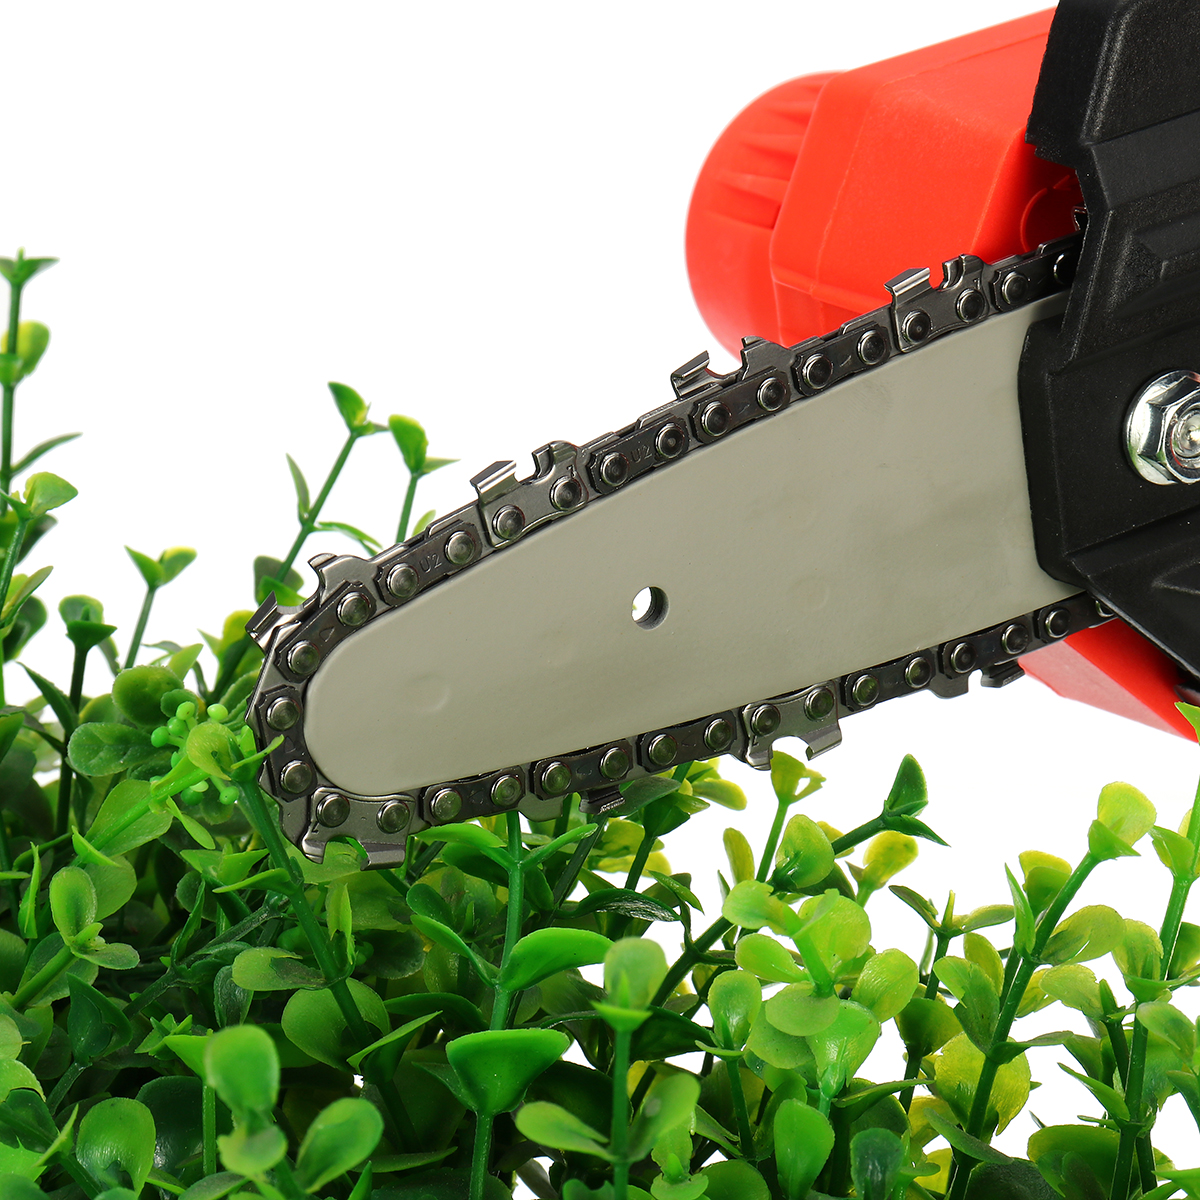 110V-Mini-Chainsaw-Cordless-Electric-Portable-Saw-Hand-held-Rechargeable-Electric-Logging-Saw-With-B-1789278-2